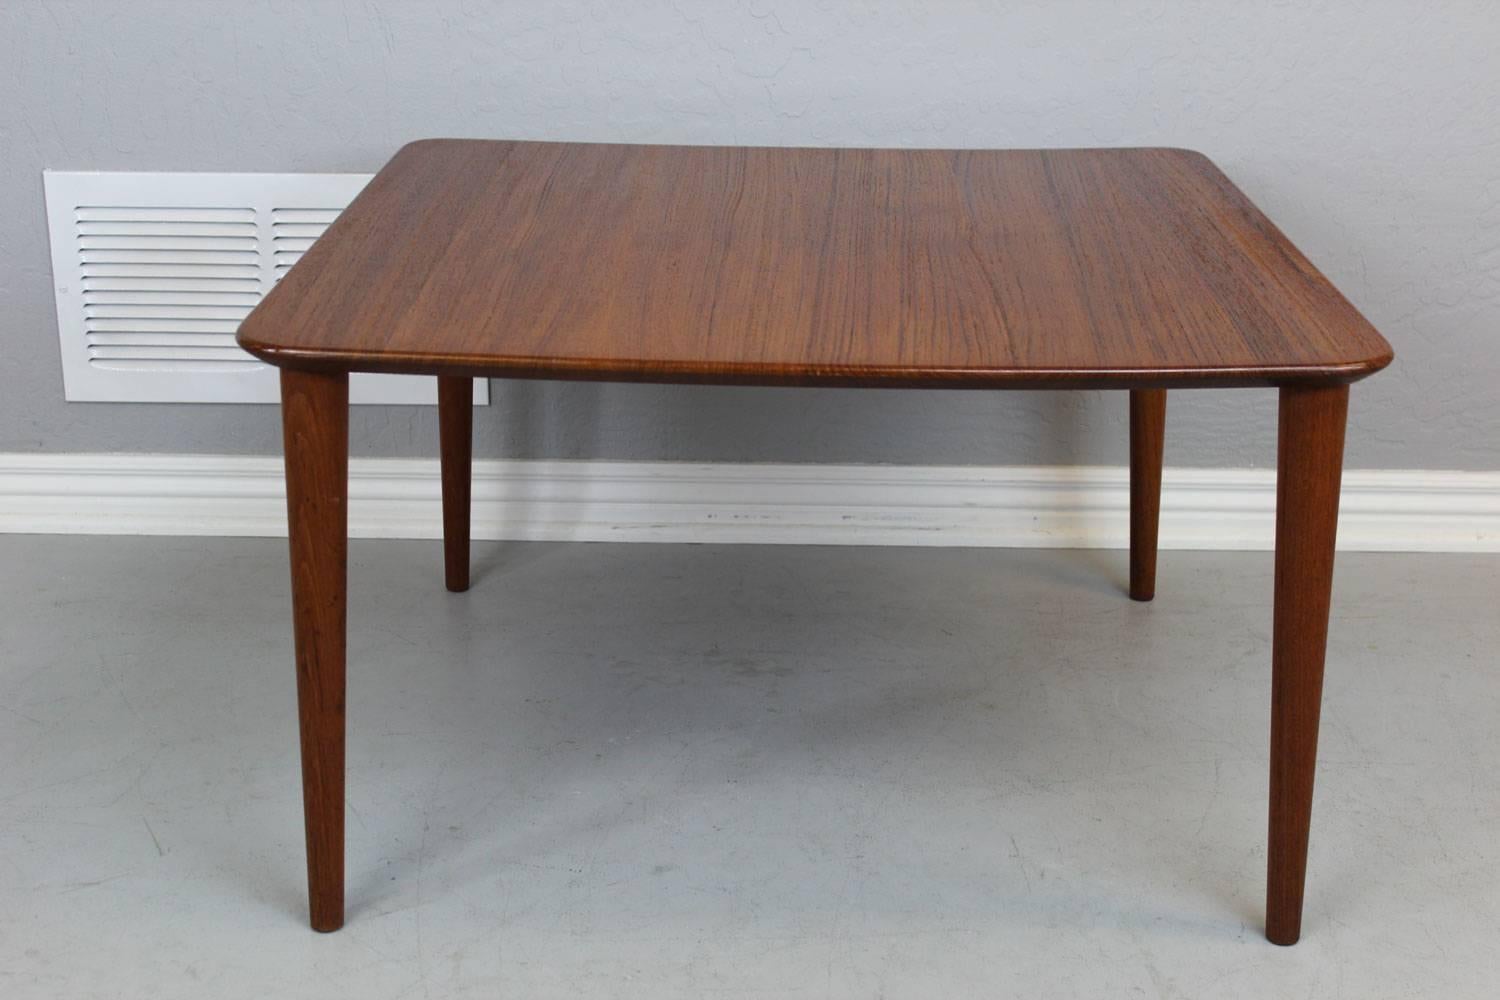 Solid teak end table manufactured by France & Daverkosen in 1959.